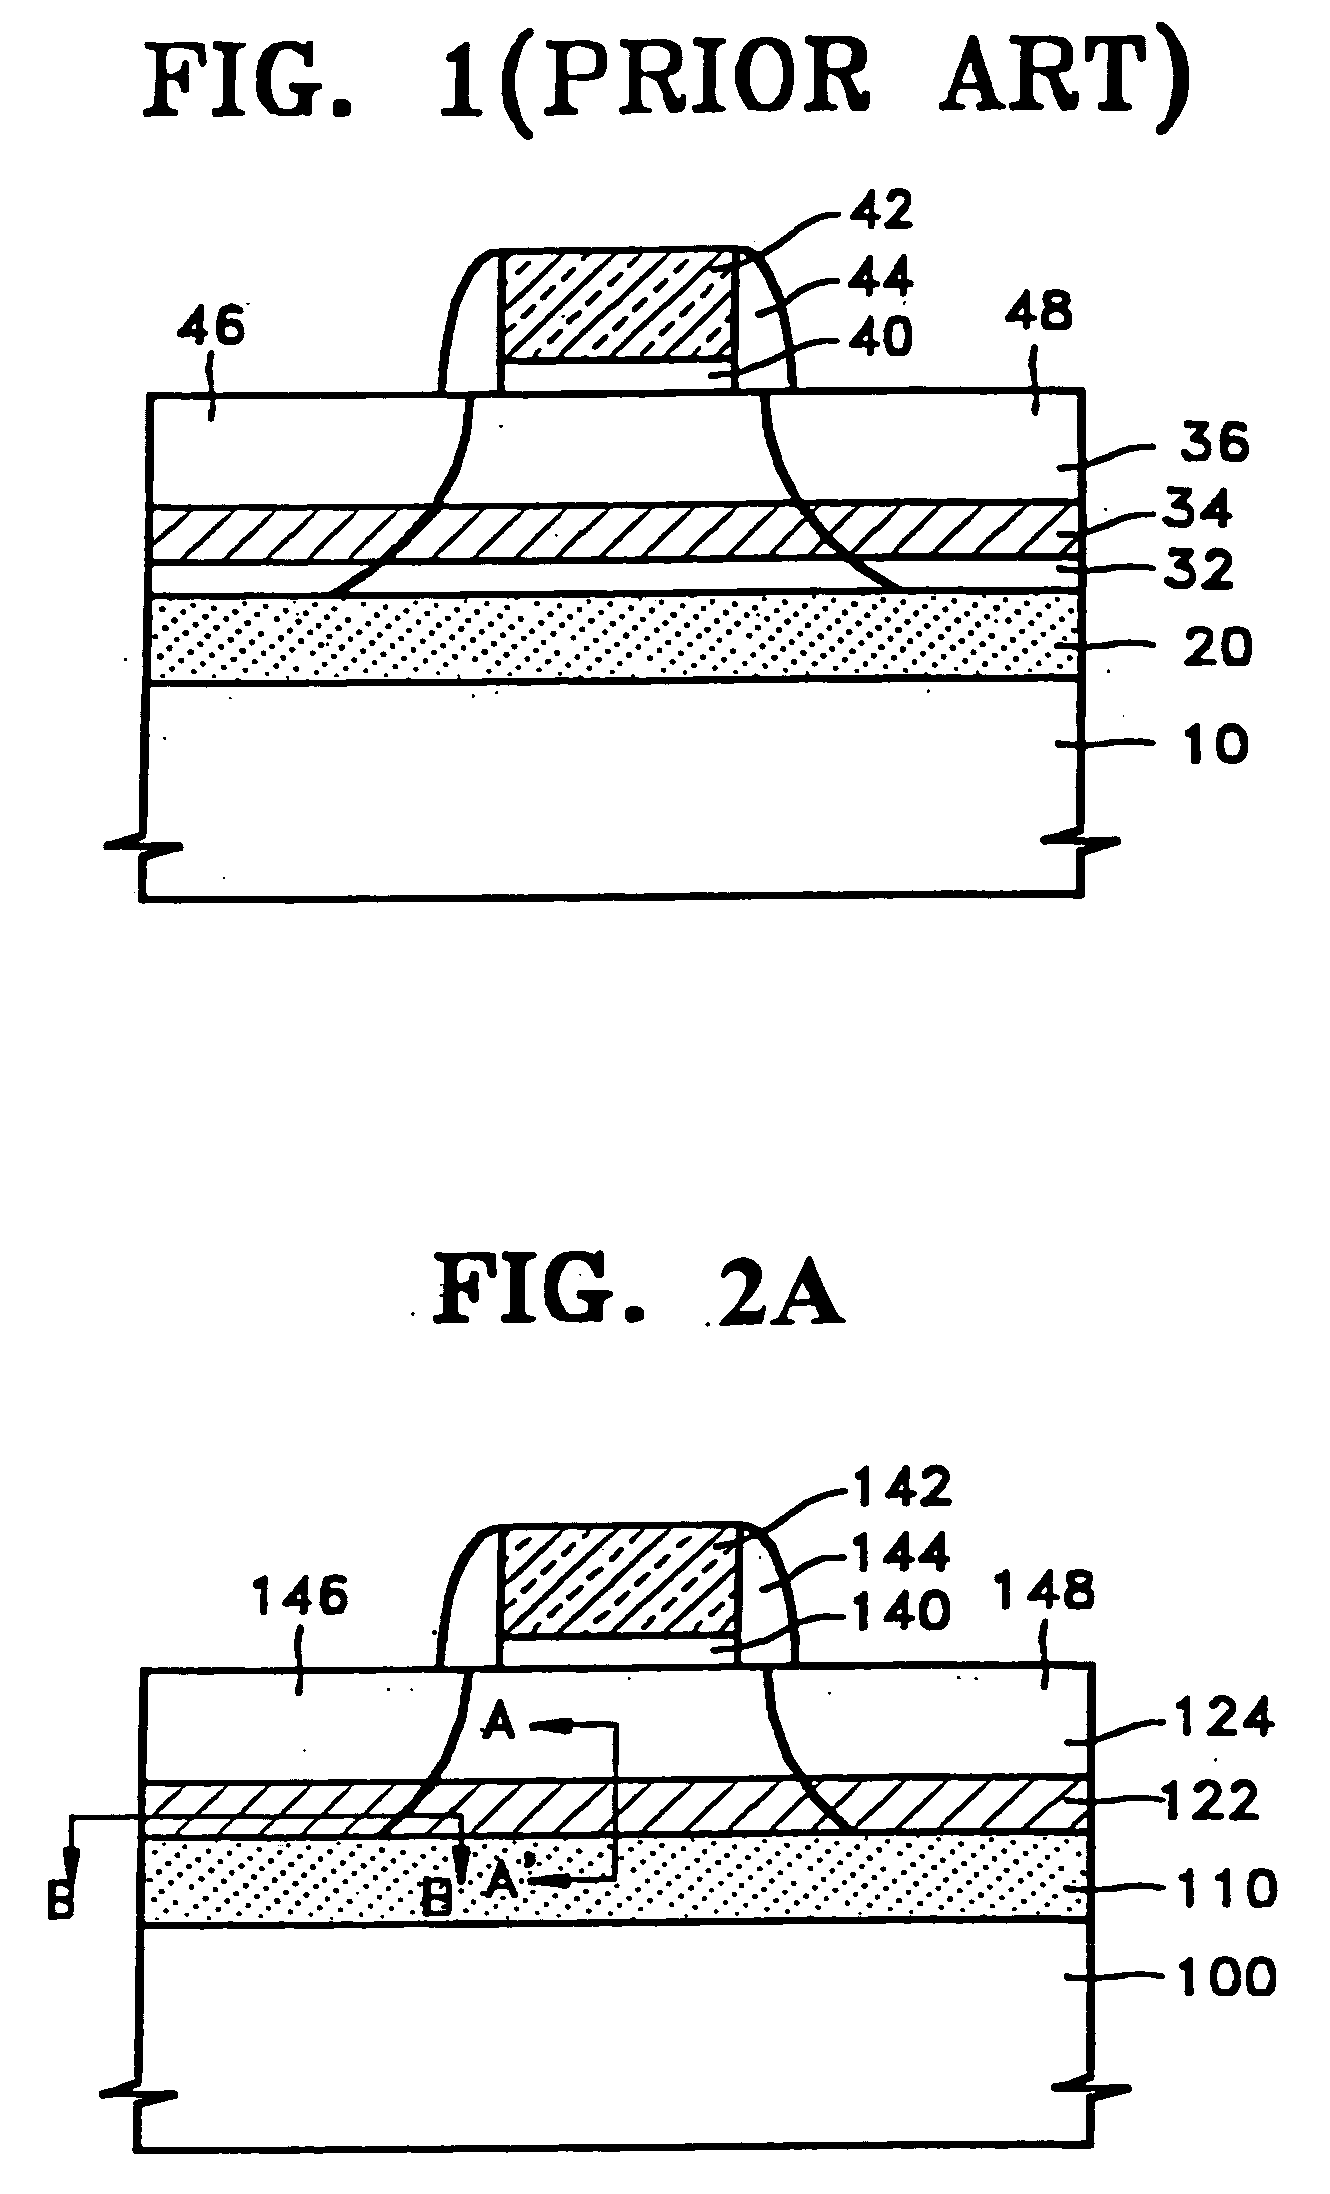 SOI structure having a sige layer interposed between the silicon and the insulator